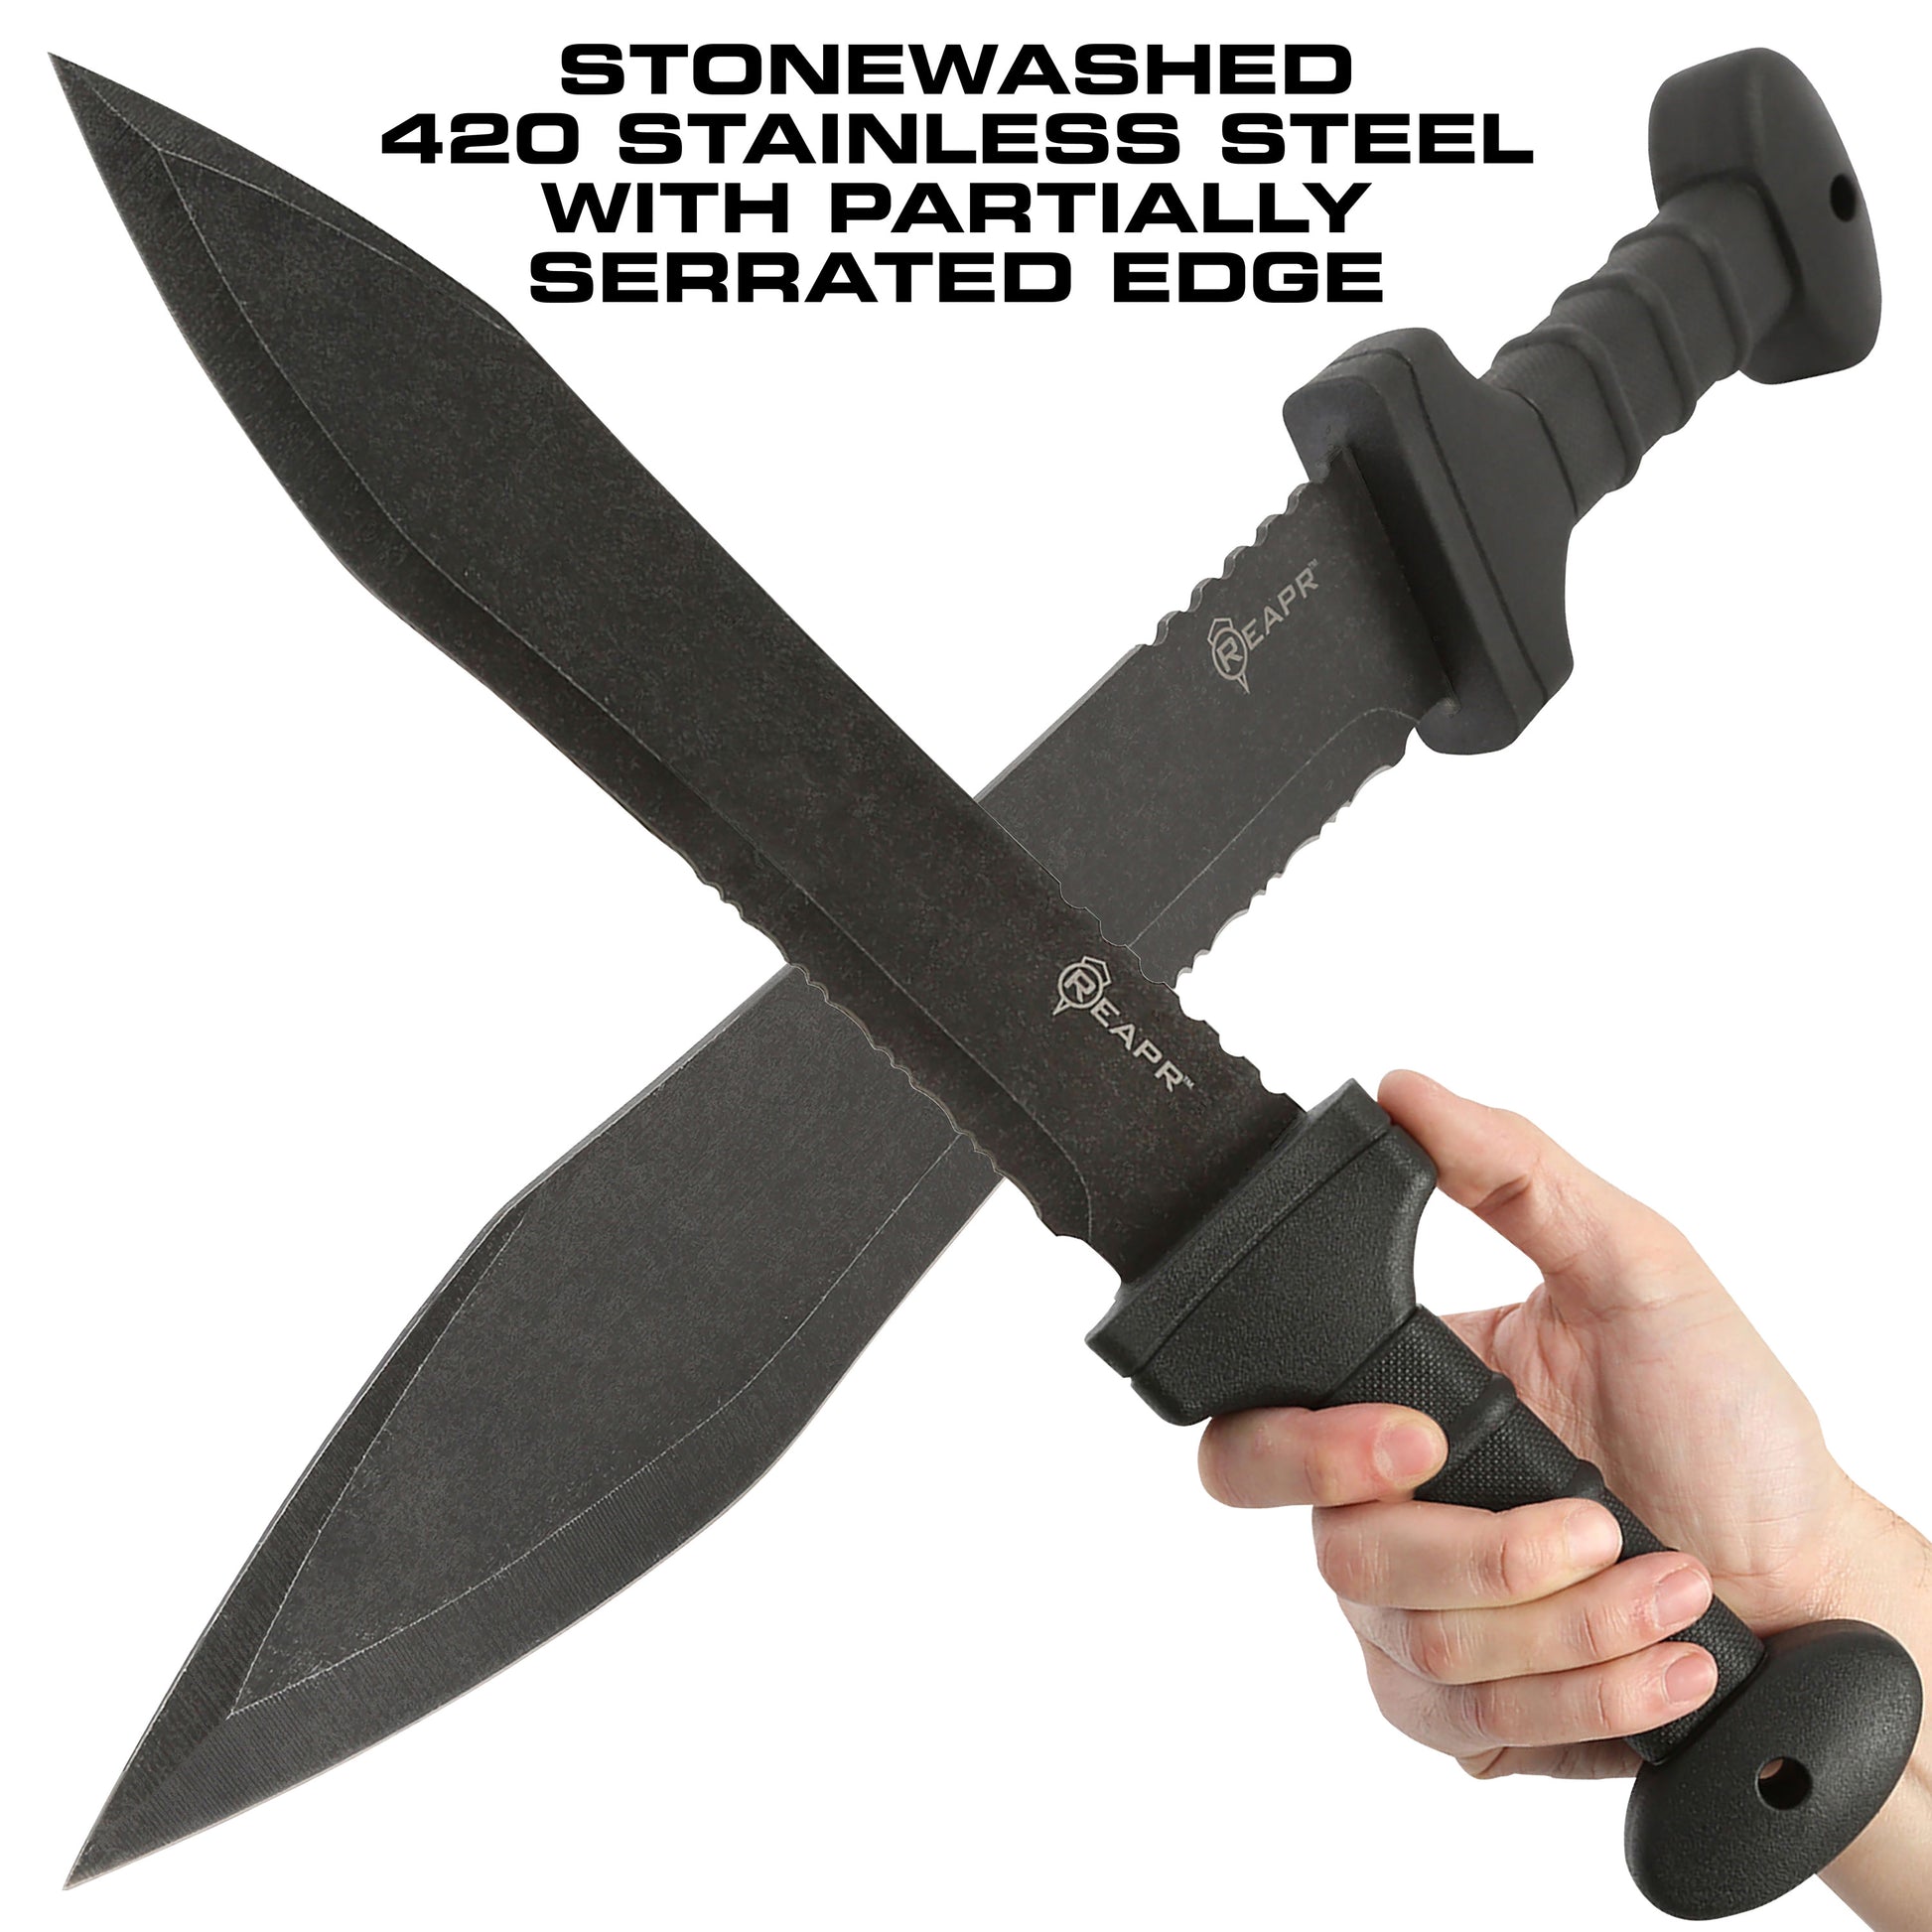  REAPR 11019 Legion Sword multi-purpose sword, perfect for hiking, camping and hunting. 